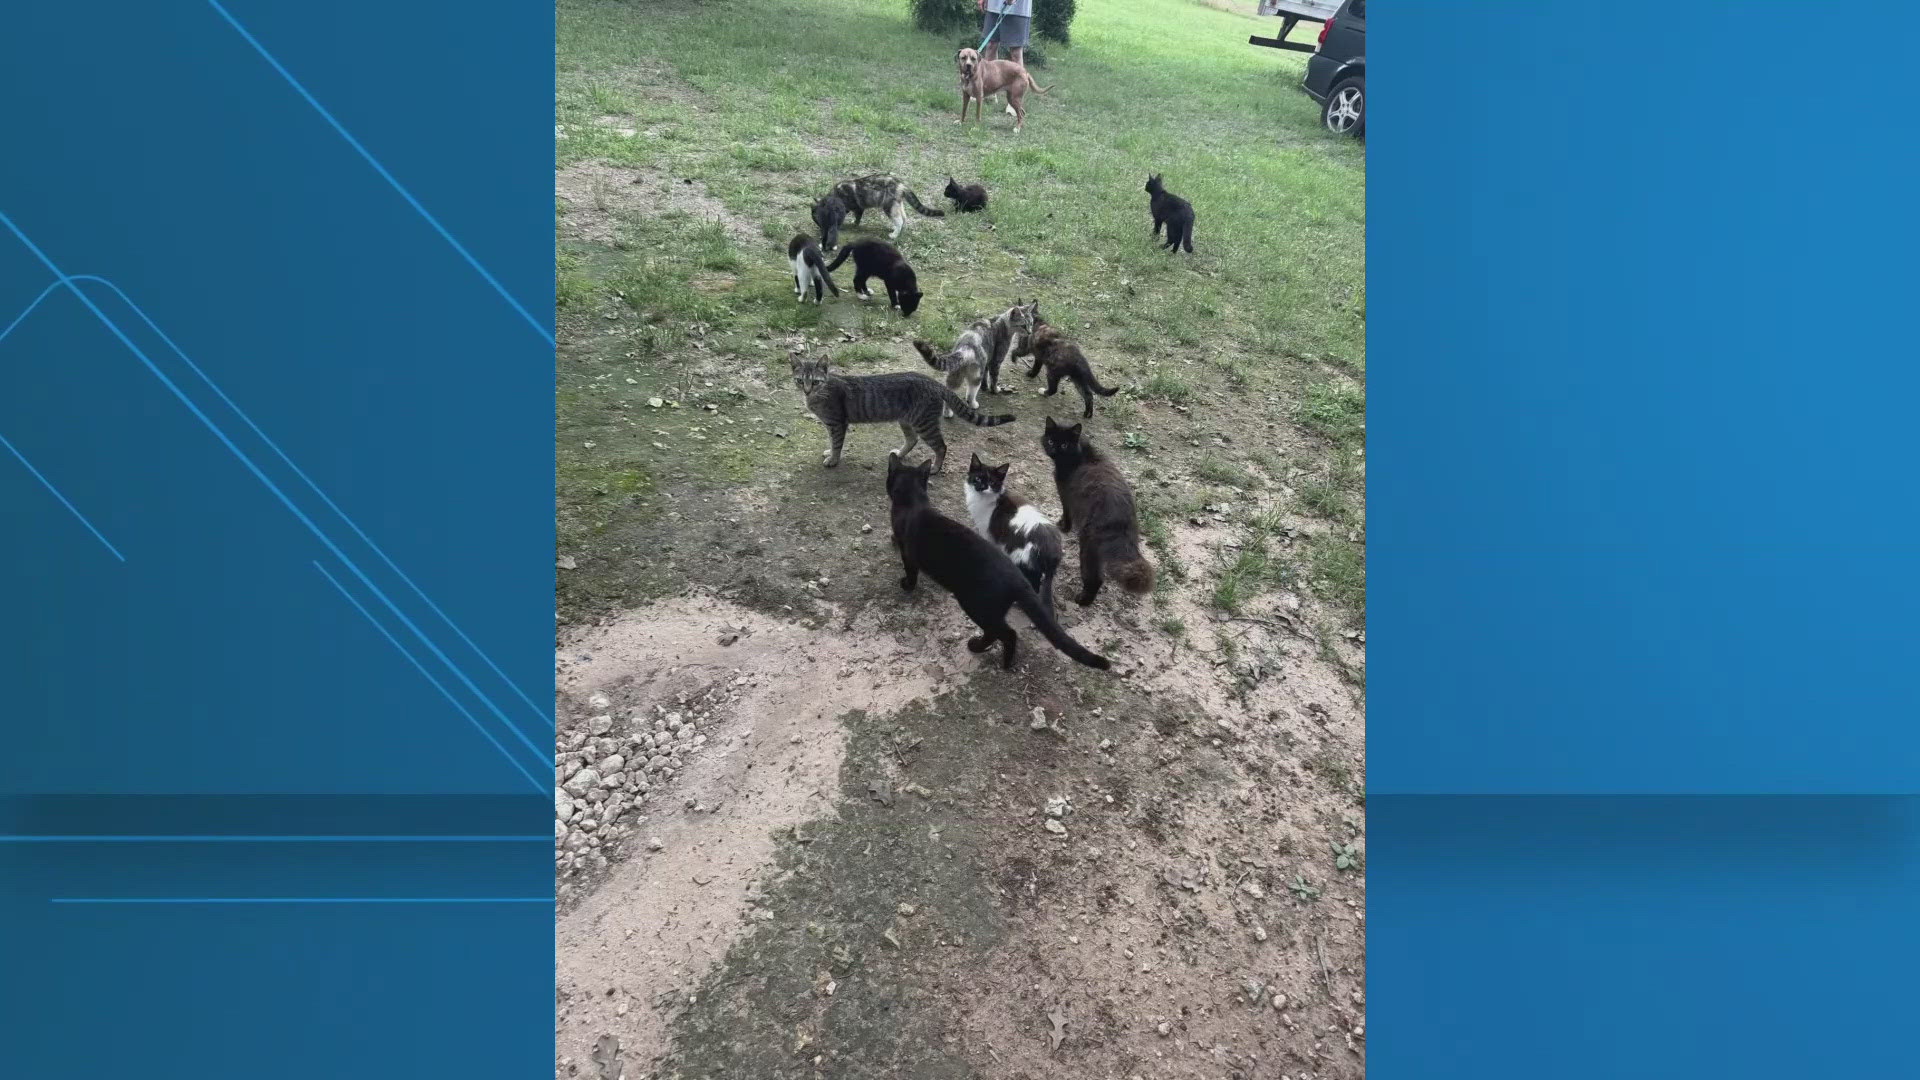 Snip & Tip lost its current facility and needs the public's help. It's a spay and neuter program that's helped more than 1,000 stray cats this year.